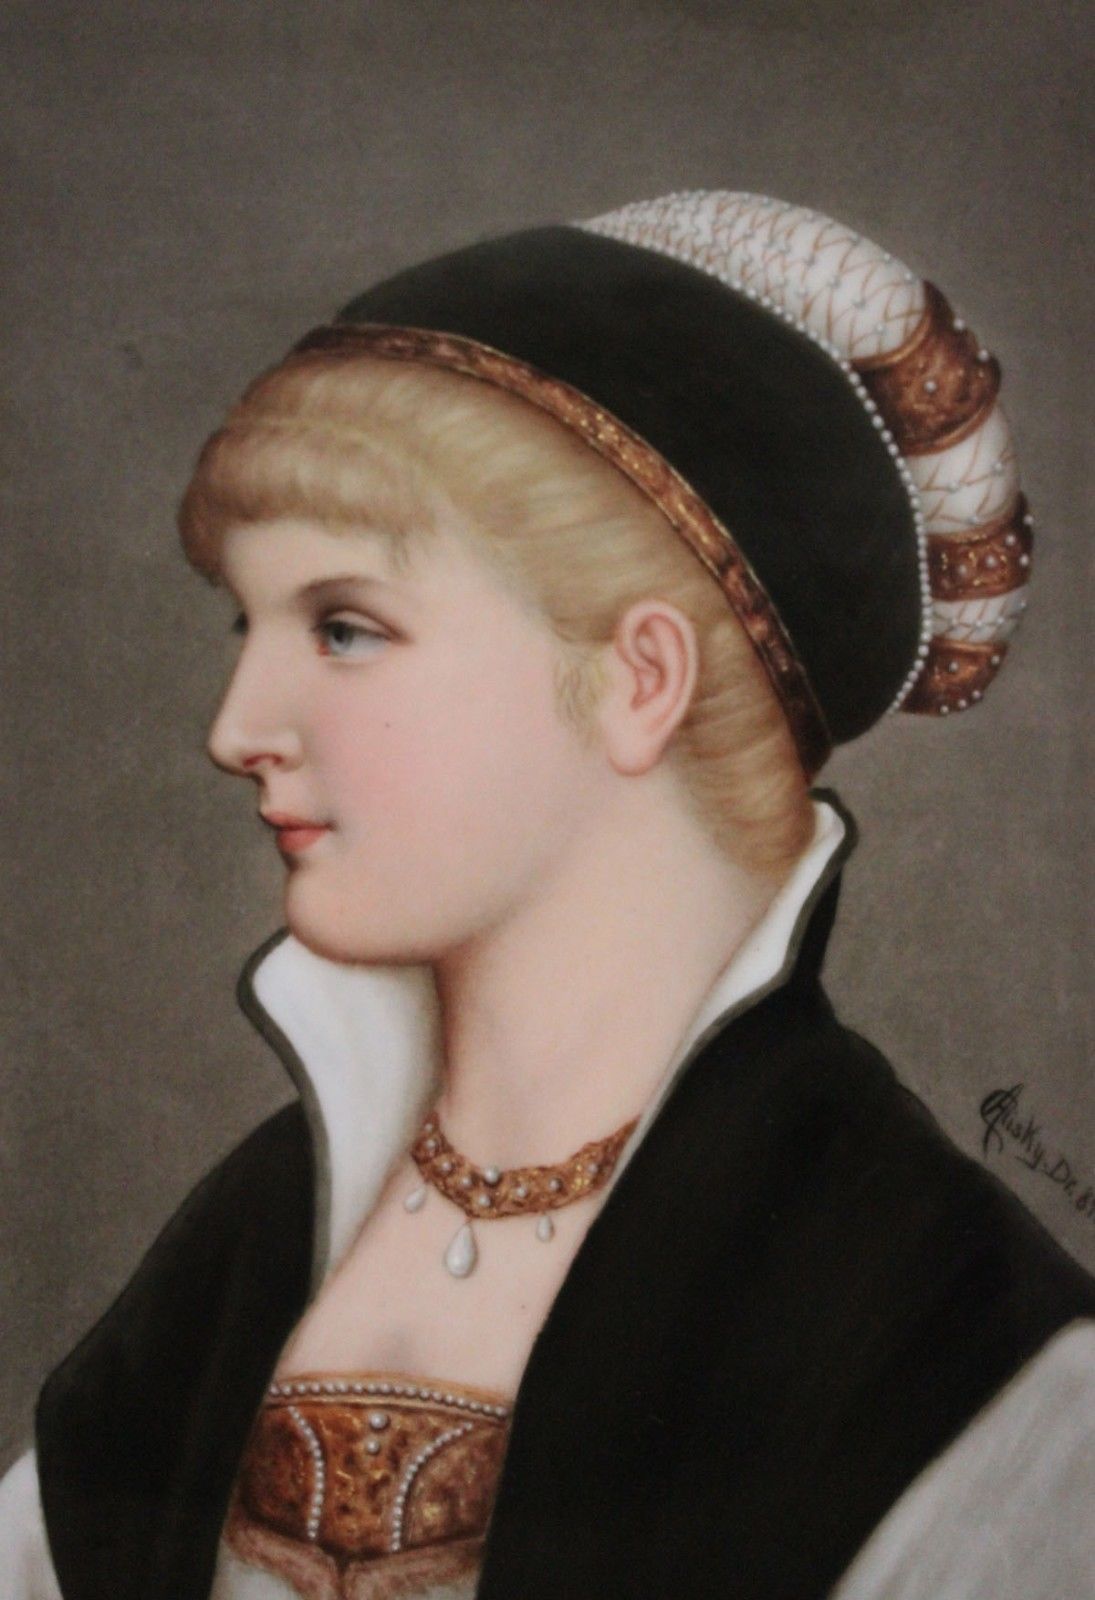 A Berlin K.P.M. Hand-Painted Porcelain Plaque of a Young Lady with a Hat

Germany, Circa 1884

Impressed with K.P.M sceptre mark

Signed: C. Alisky Dr.84 (C. Alisky Dresden 1884)

Dimensions: Plaque Height: 6